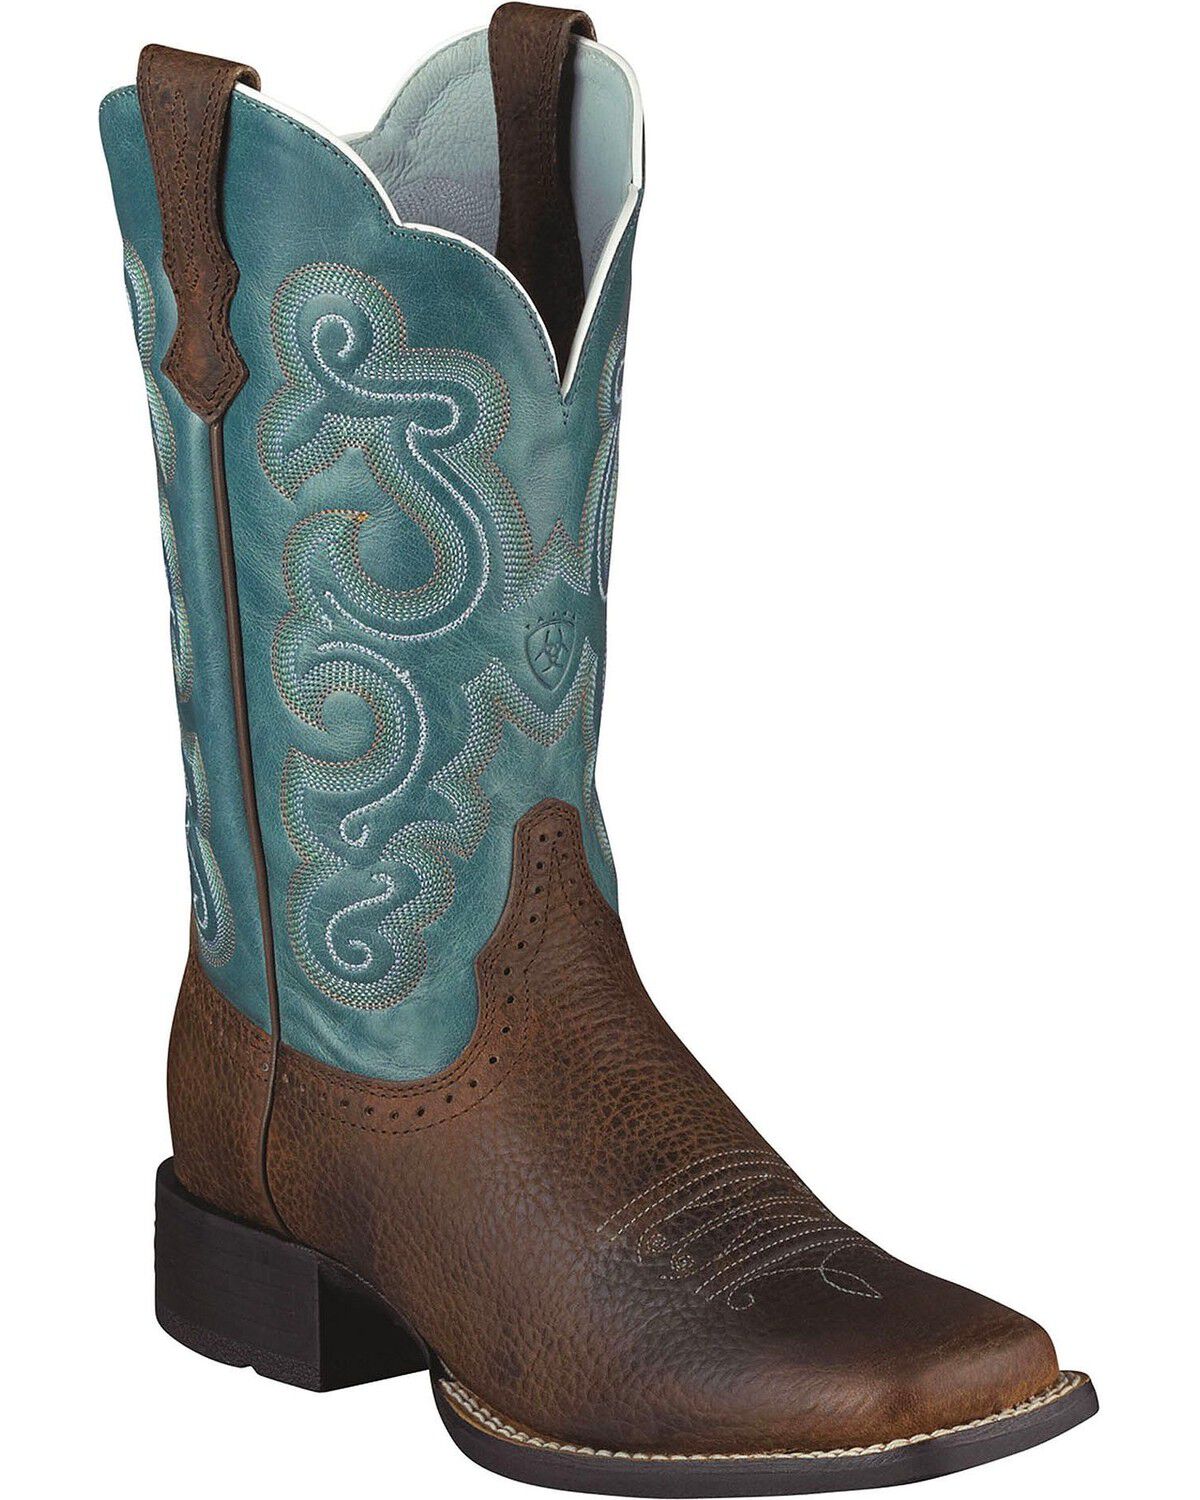 blue country boots